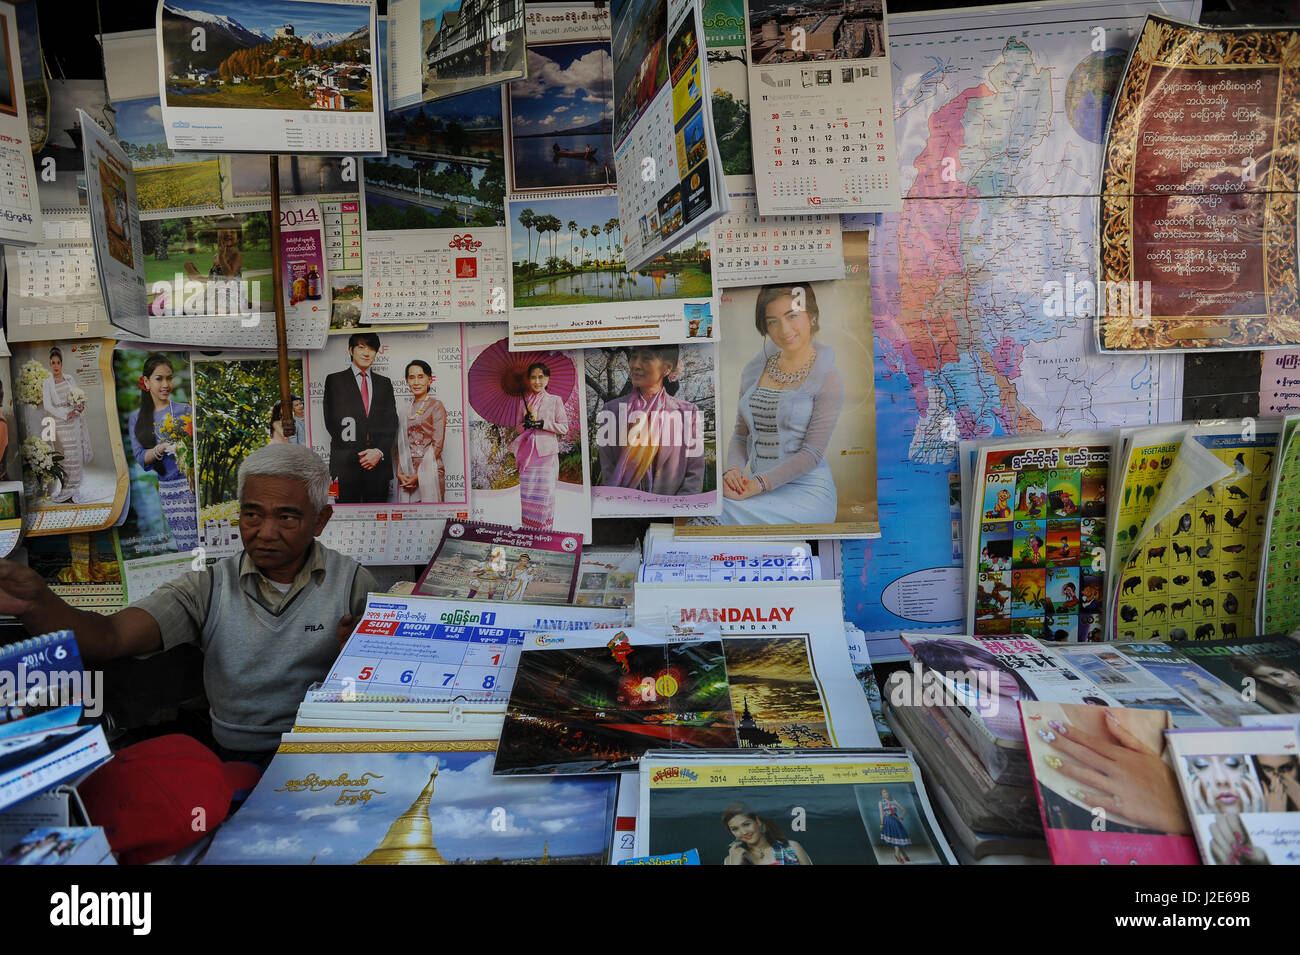 20.12.2013, Yangon, Republic of the Union of Myanmar, Asia - A street vendor sells calenders and posters with the picture of Aung San Suu Kyi. Stock Photo